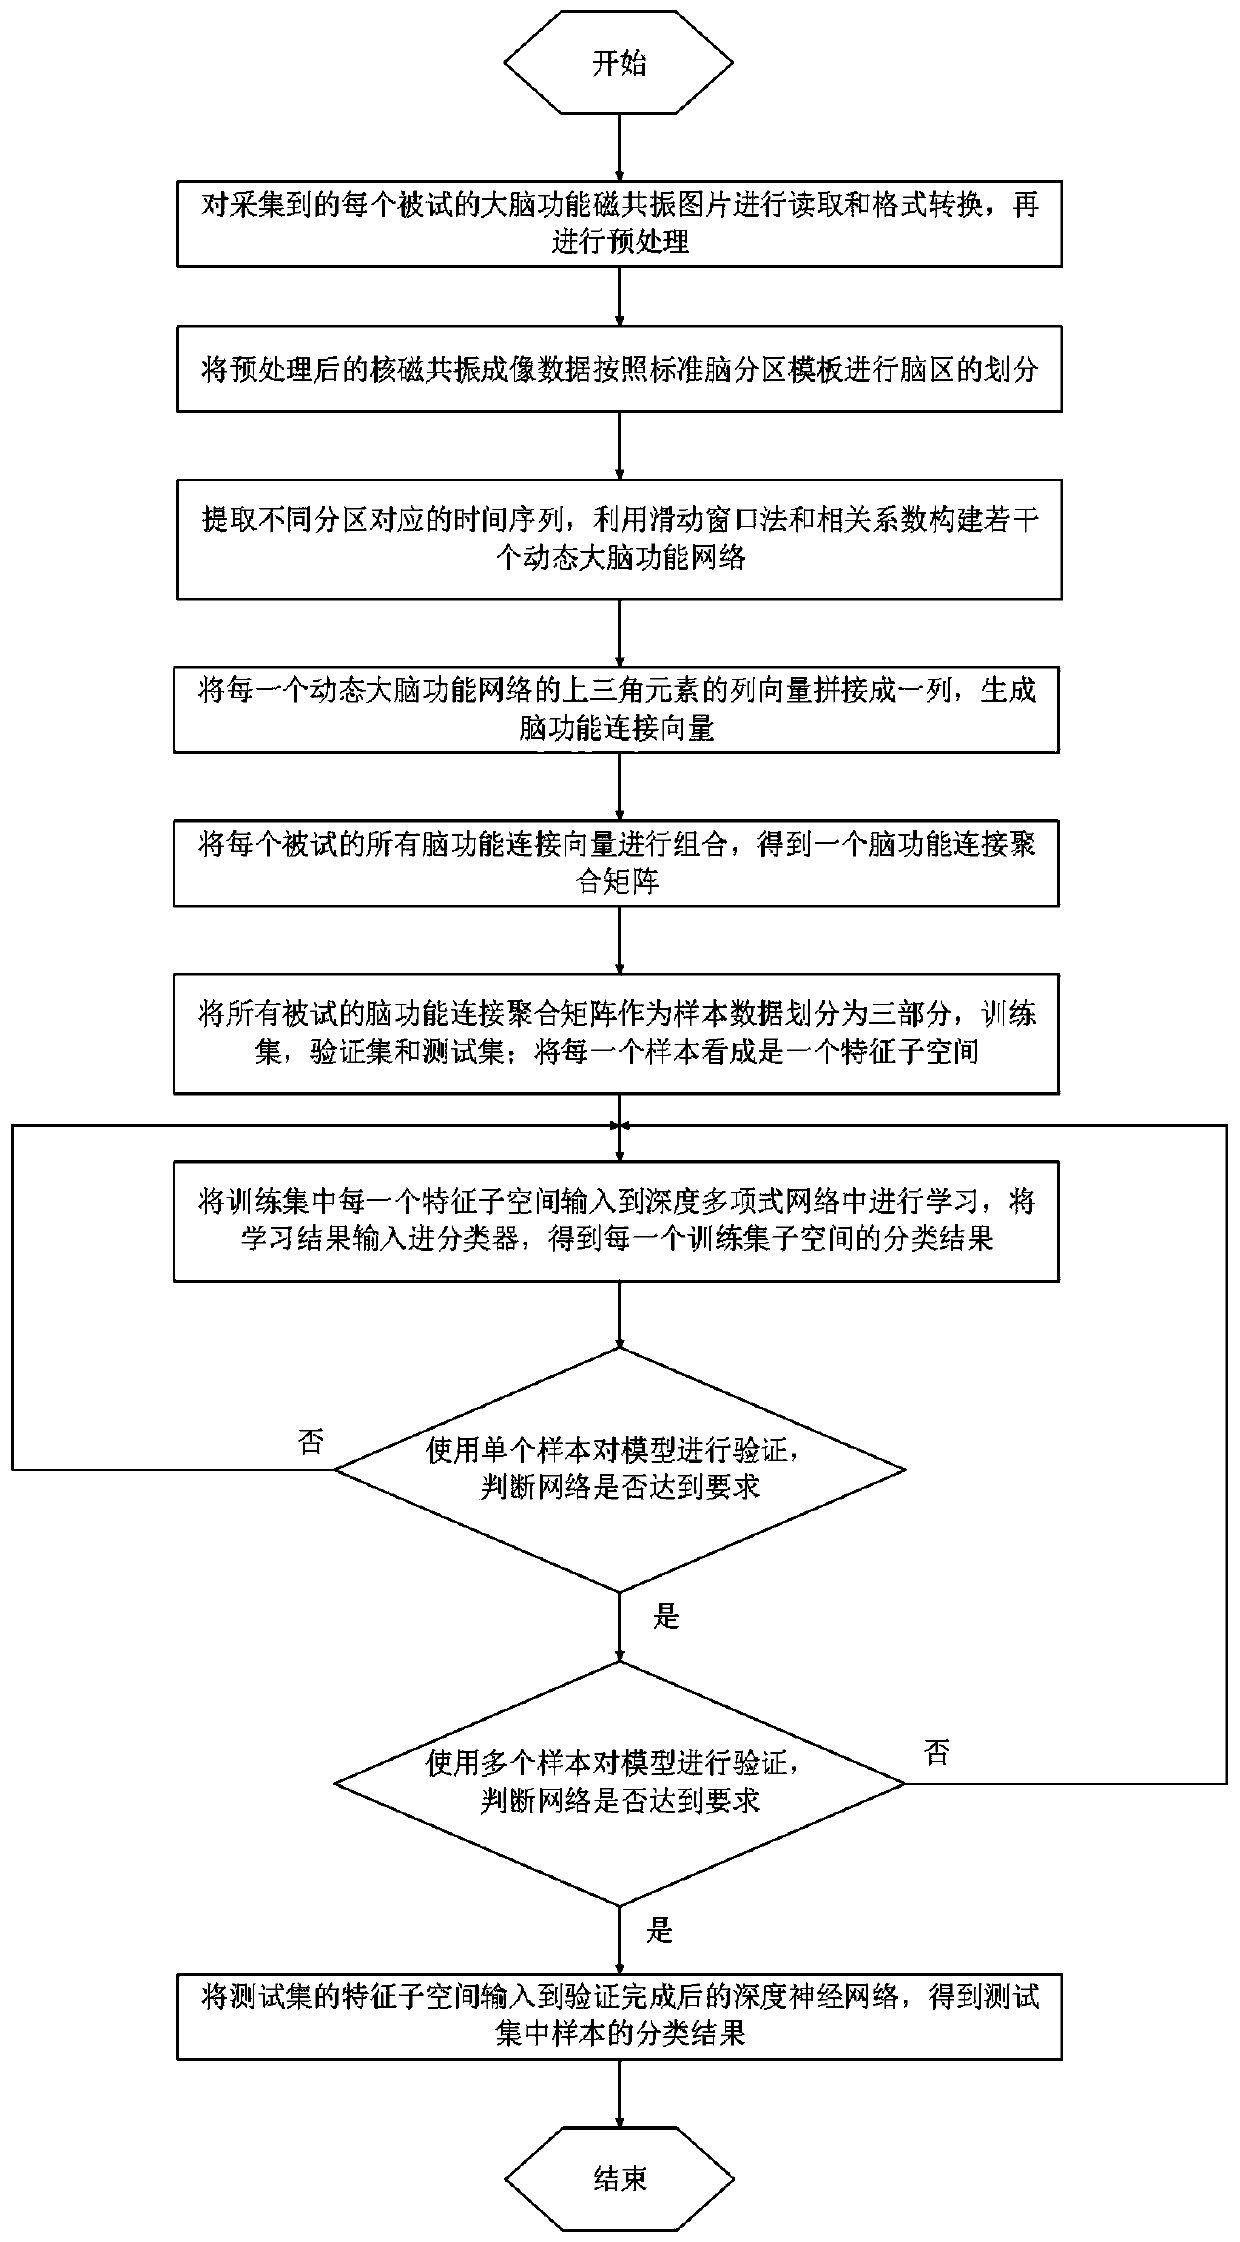 Brain function network feature classification method